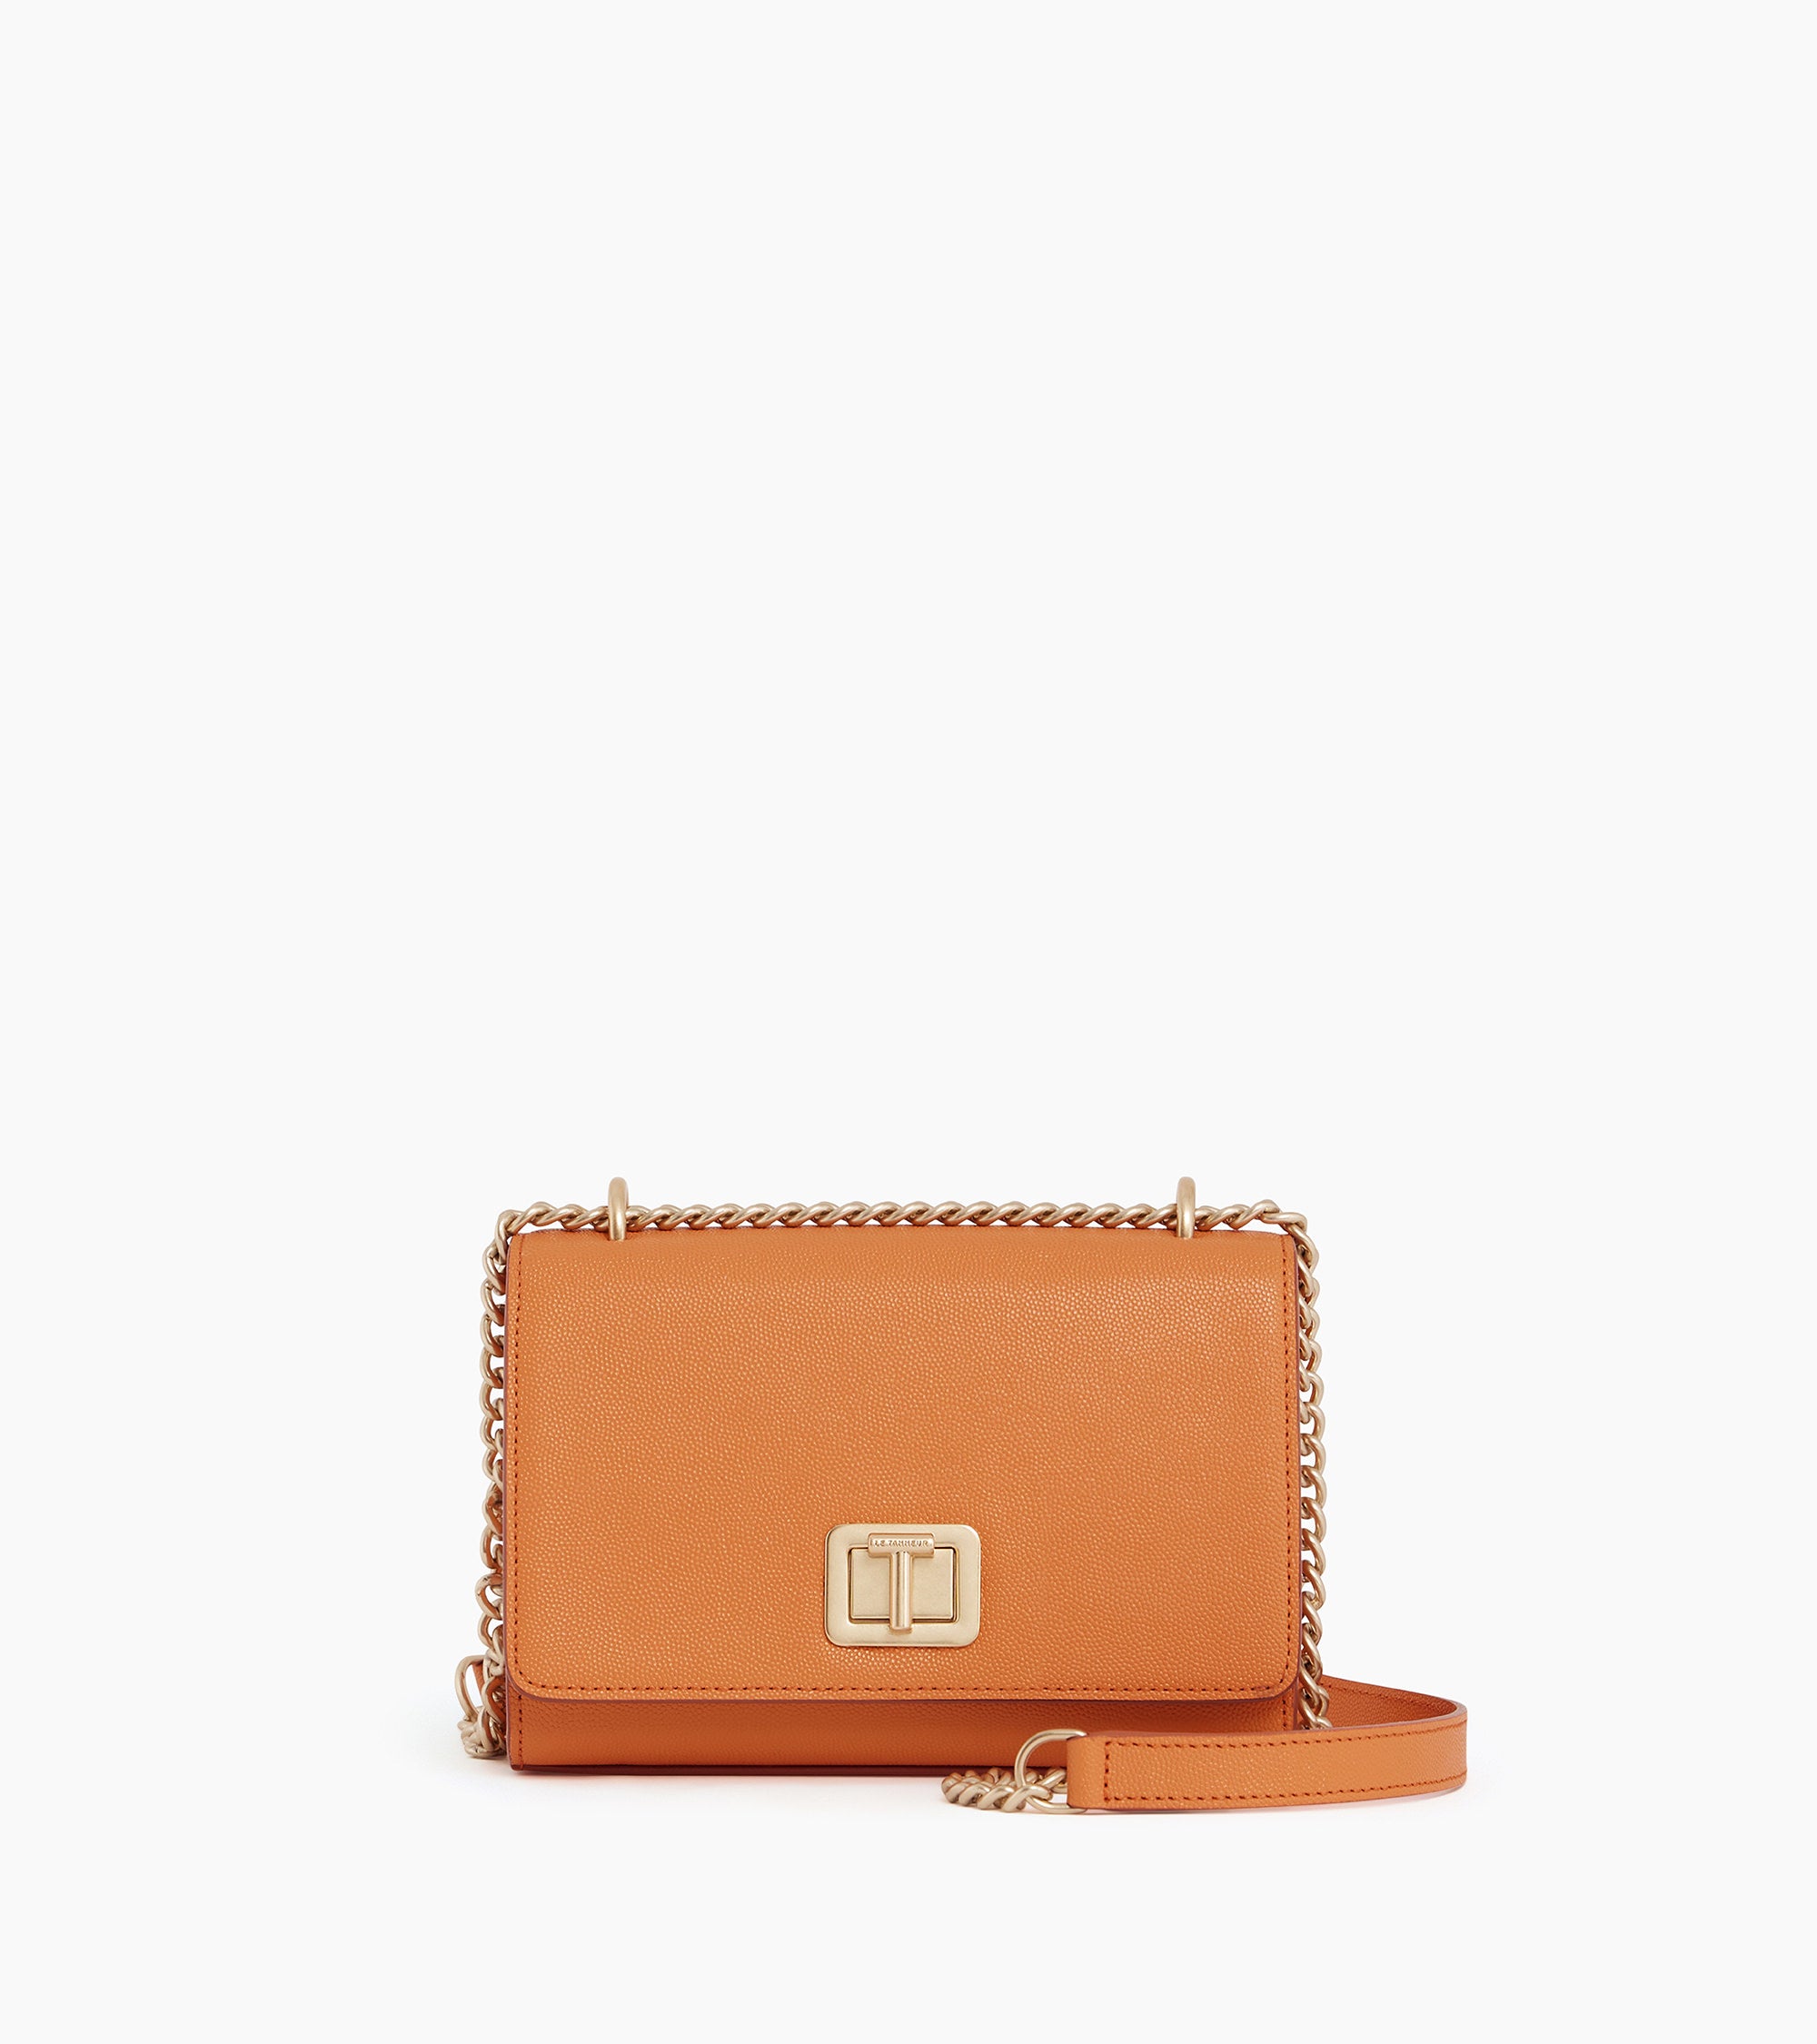 Eva small bag with crossbody strap in pebbled leather